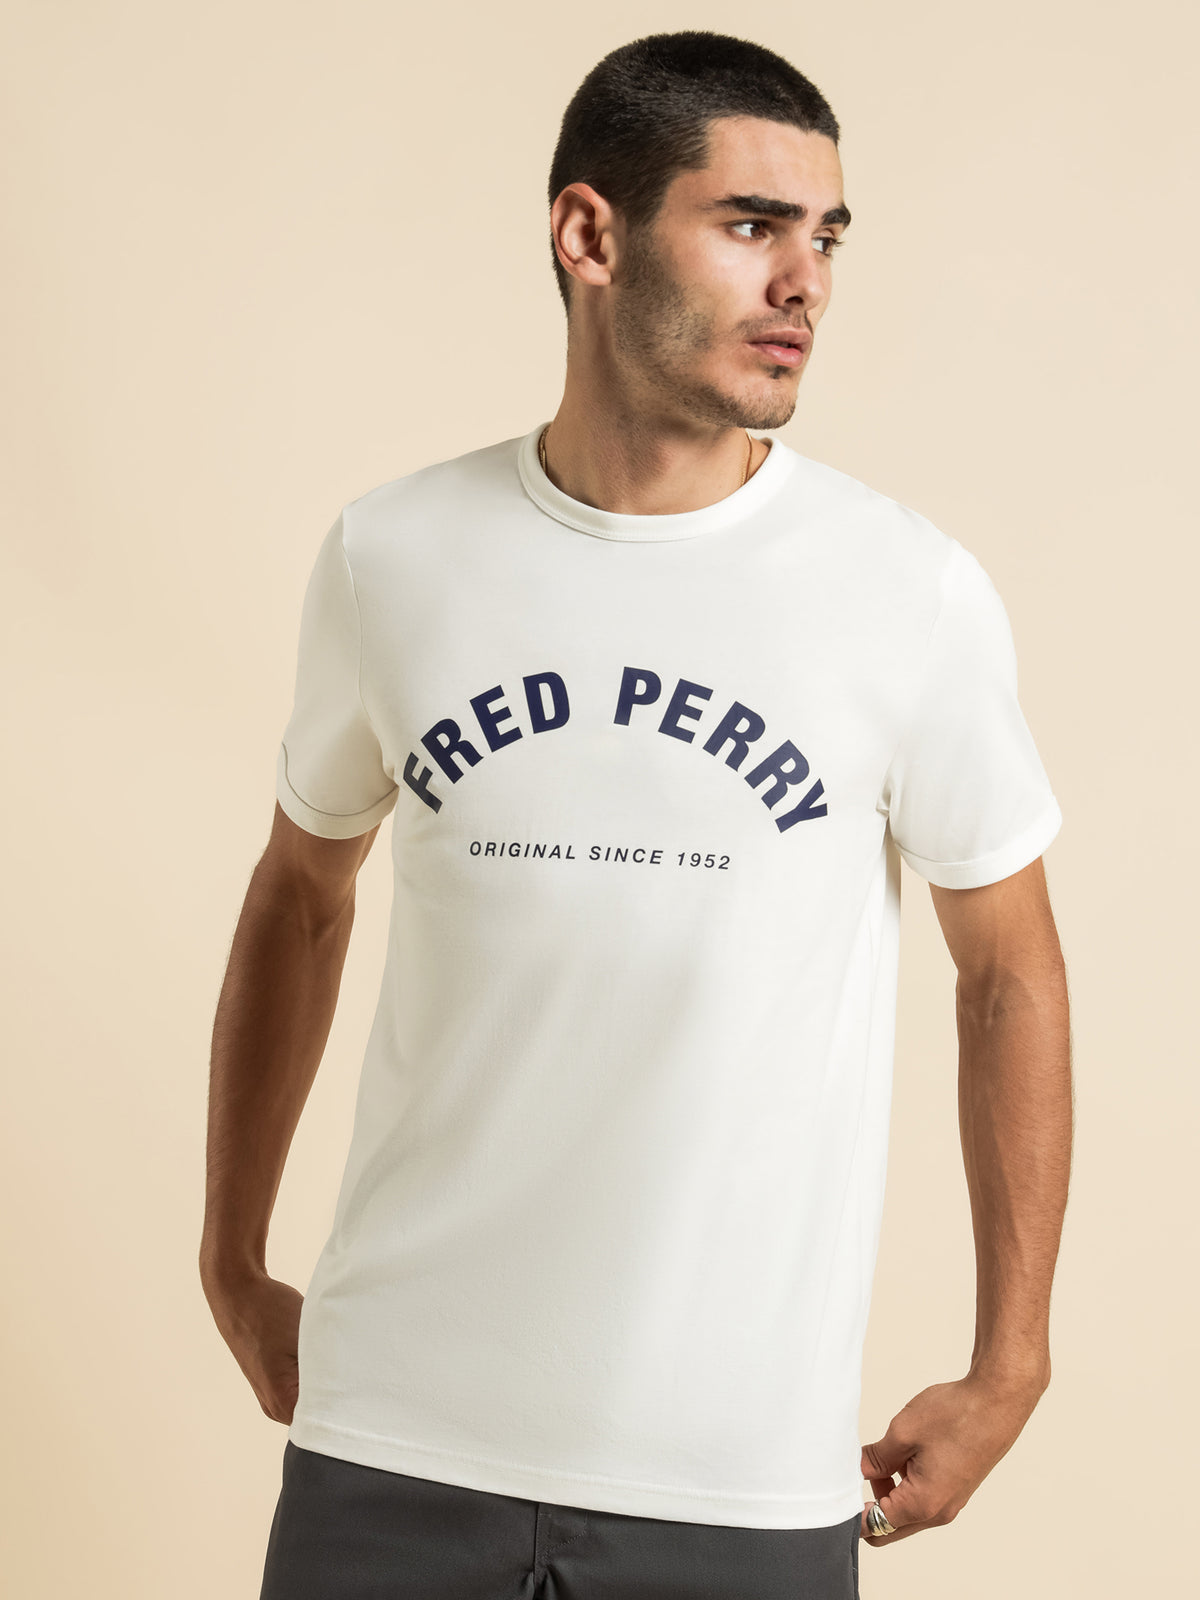 Arch Branded T-Shirt in White